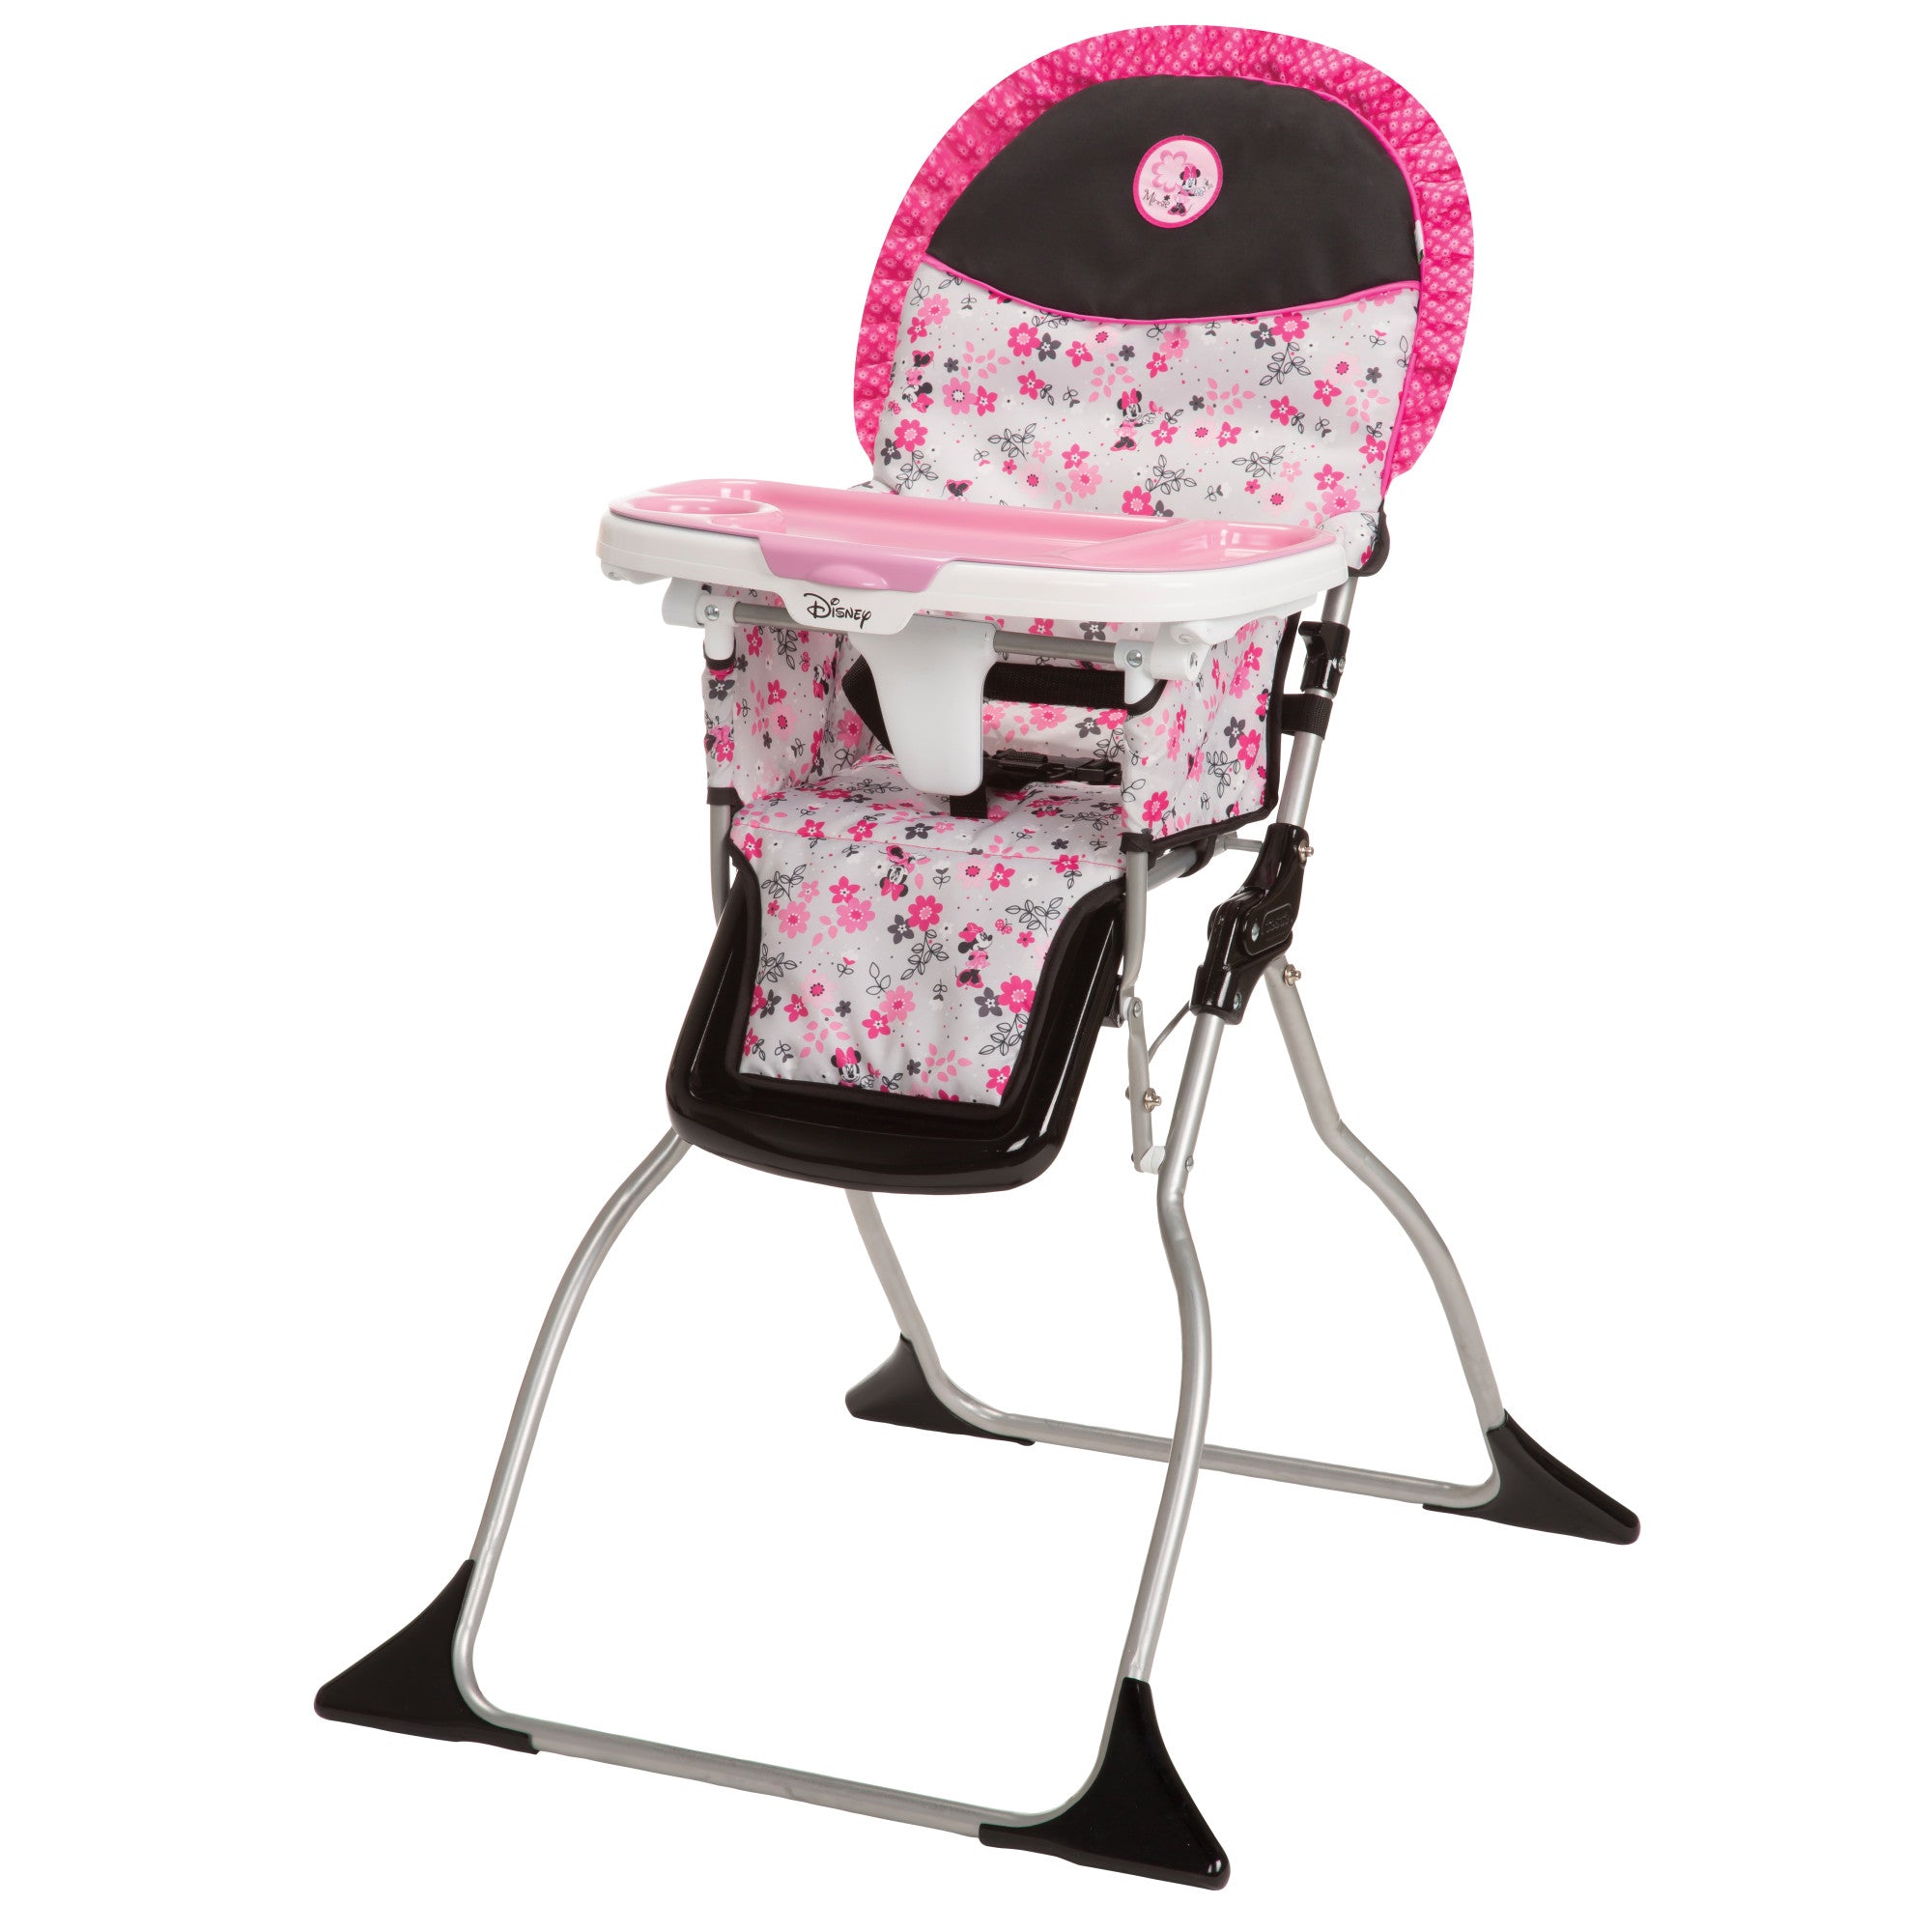 Disney Baby Minnie Simple Fold™ Plus High Chair - stands on its own when folded